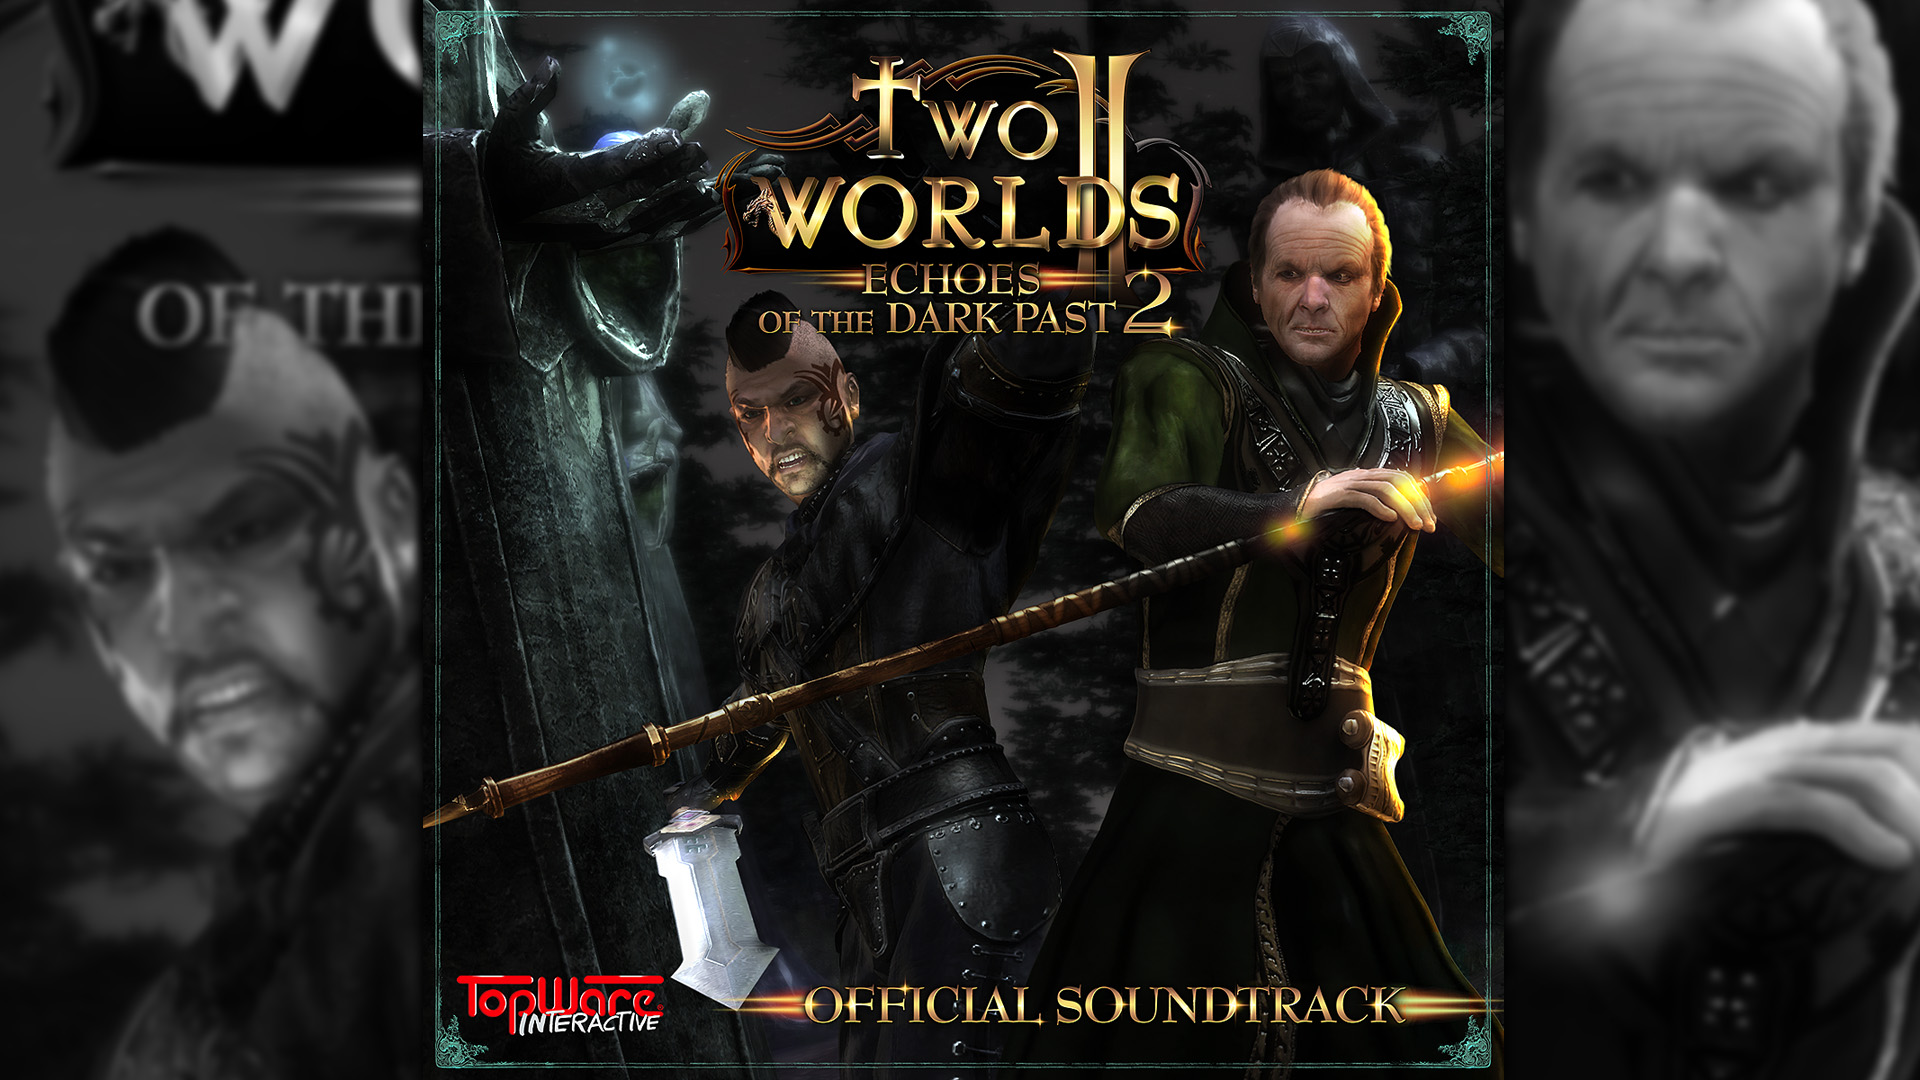 Two Worlds II - Echoes of the Dark Past 2 Soundtrack Featured Screenshot #1